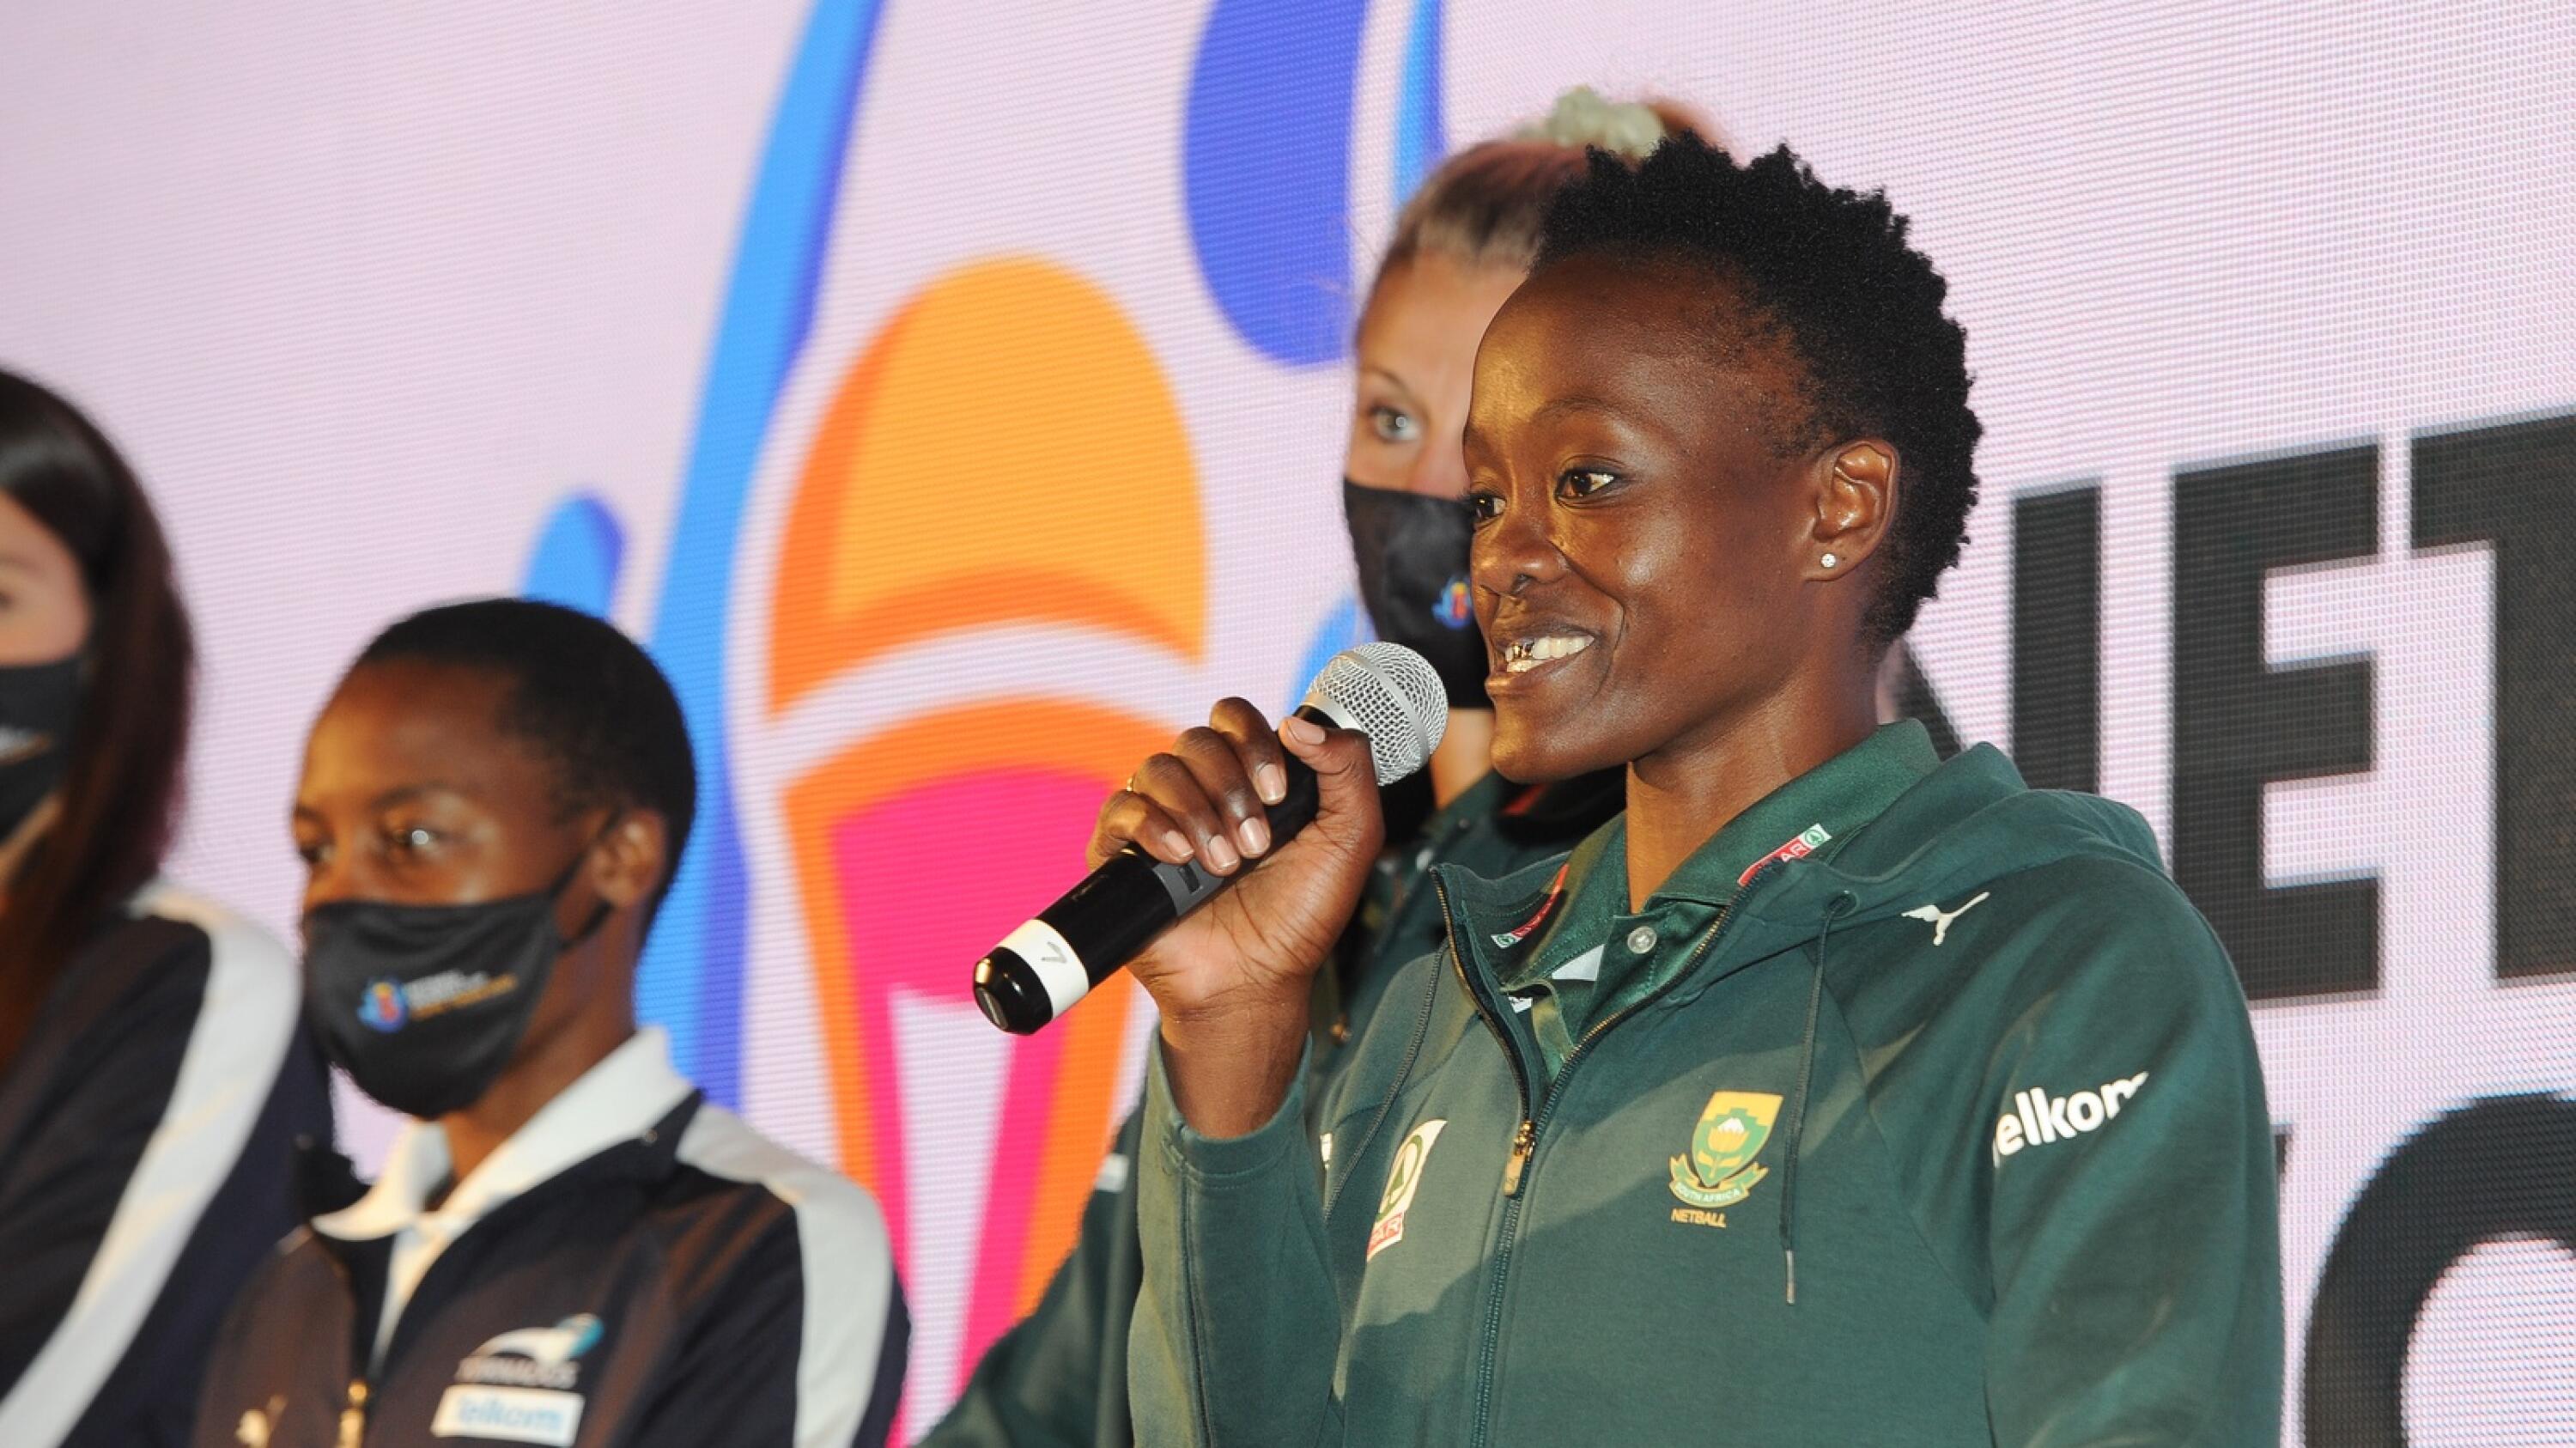 Bongi Msomi hold a mic during a presentation.